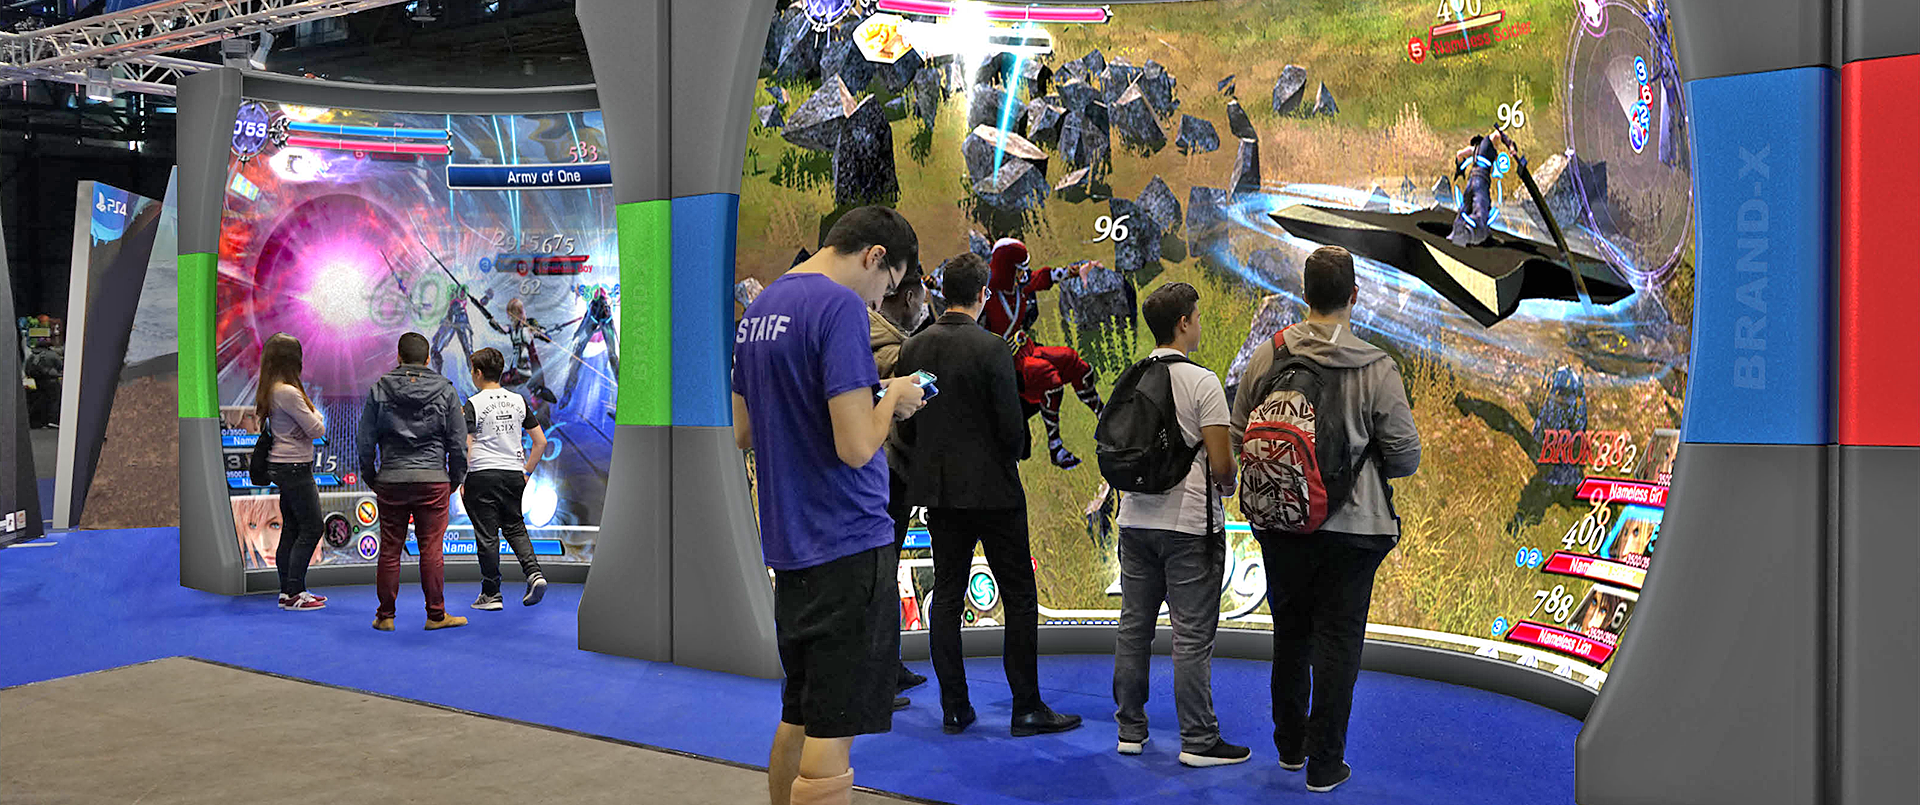 Virtual reality trade show booths